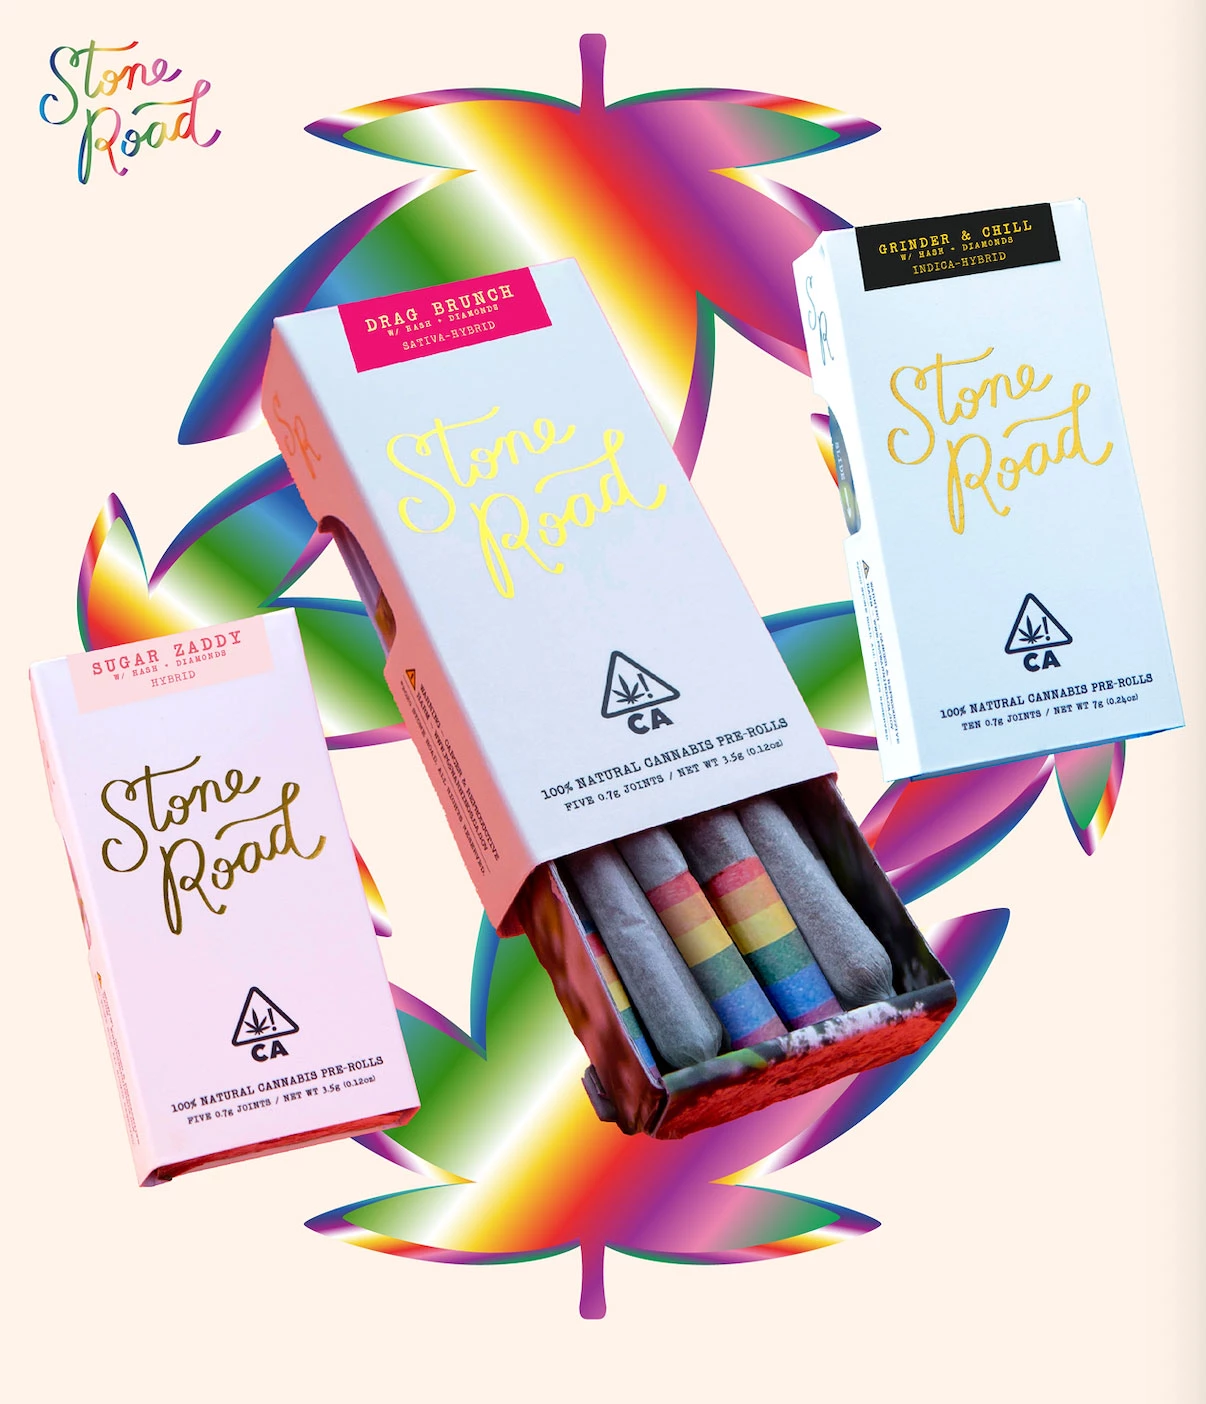 LGBTQ inspired cannabis products